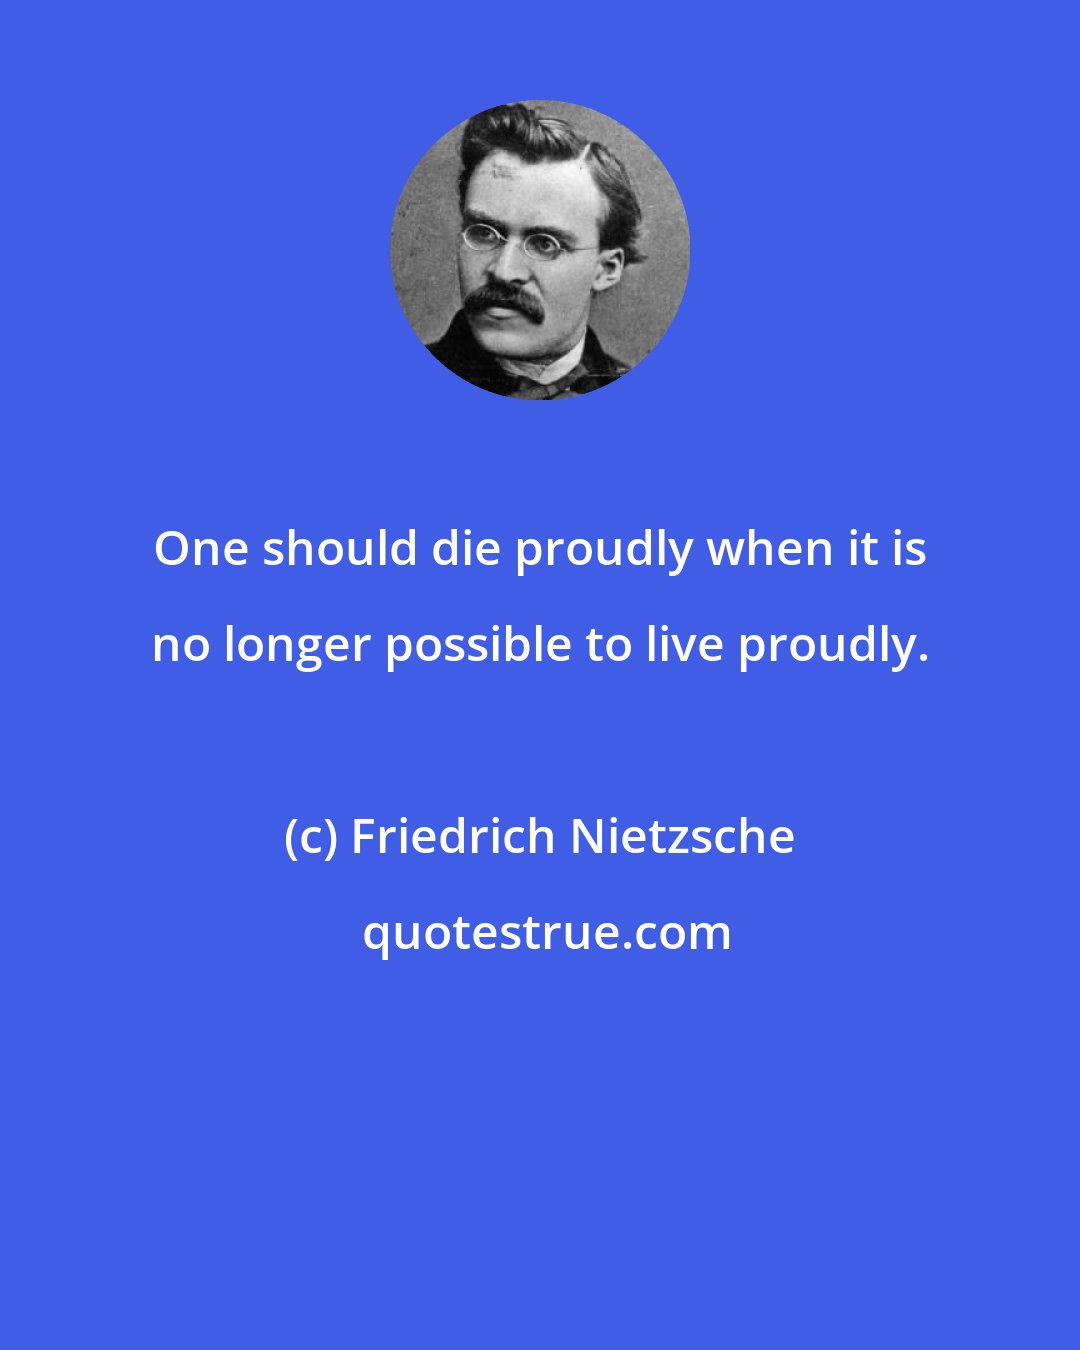 Friedrich Nietzsche: One should die proudly when it is no longer possible to live proudly.